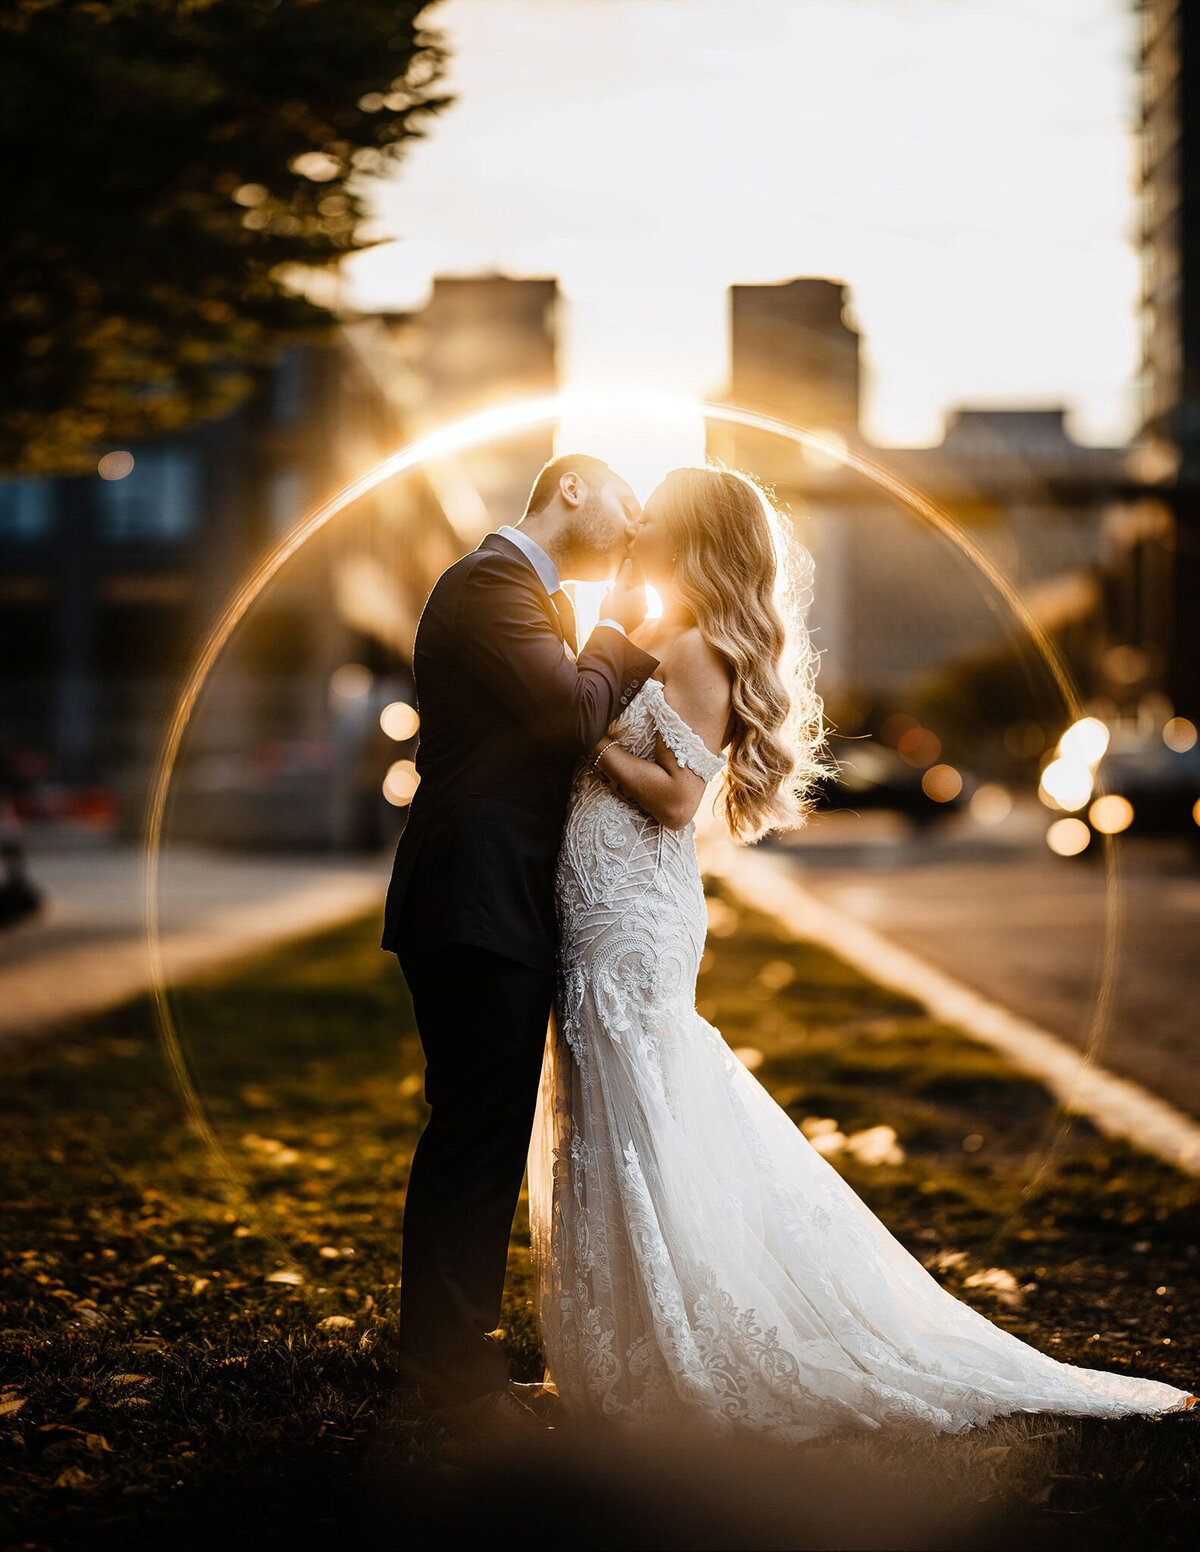 Stunning bride and groom portrait in downtown Calgary captured by TkShotz, modern wedding photographer and videographer in Calgary, Alberta. Featured on the Bronte Bride Vendor Guide.